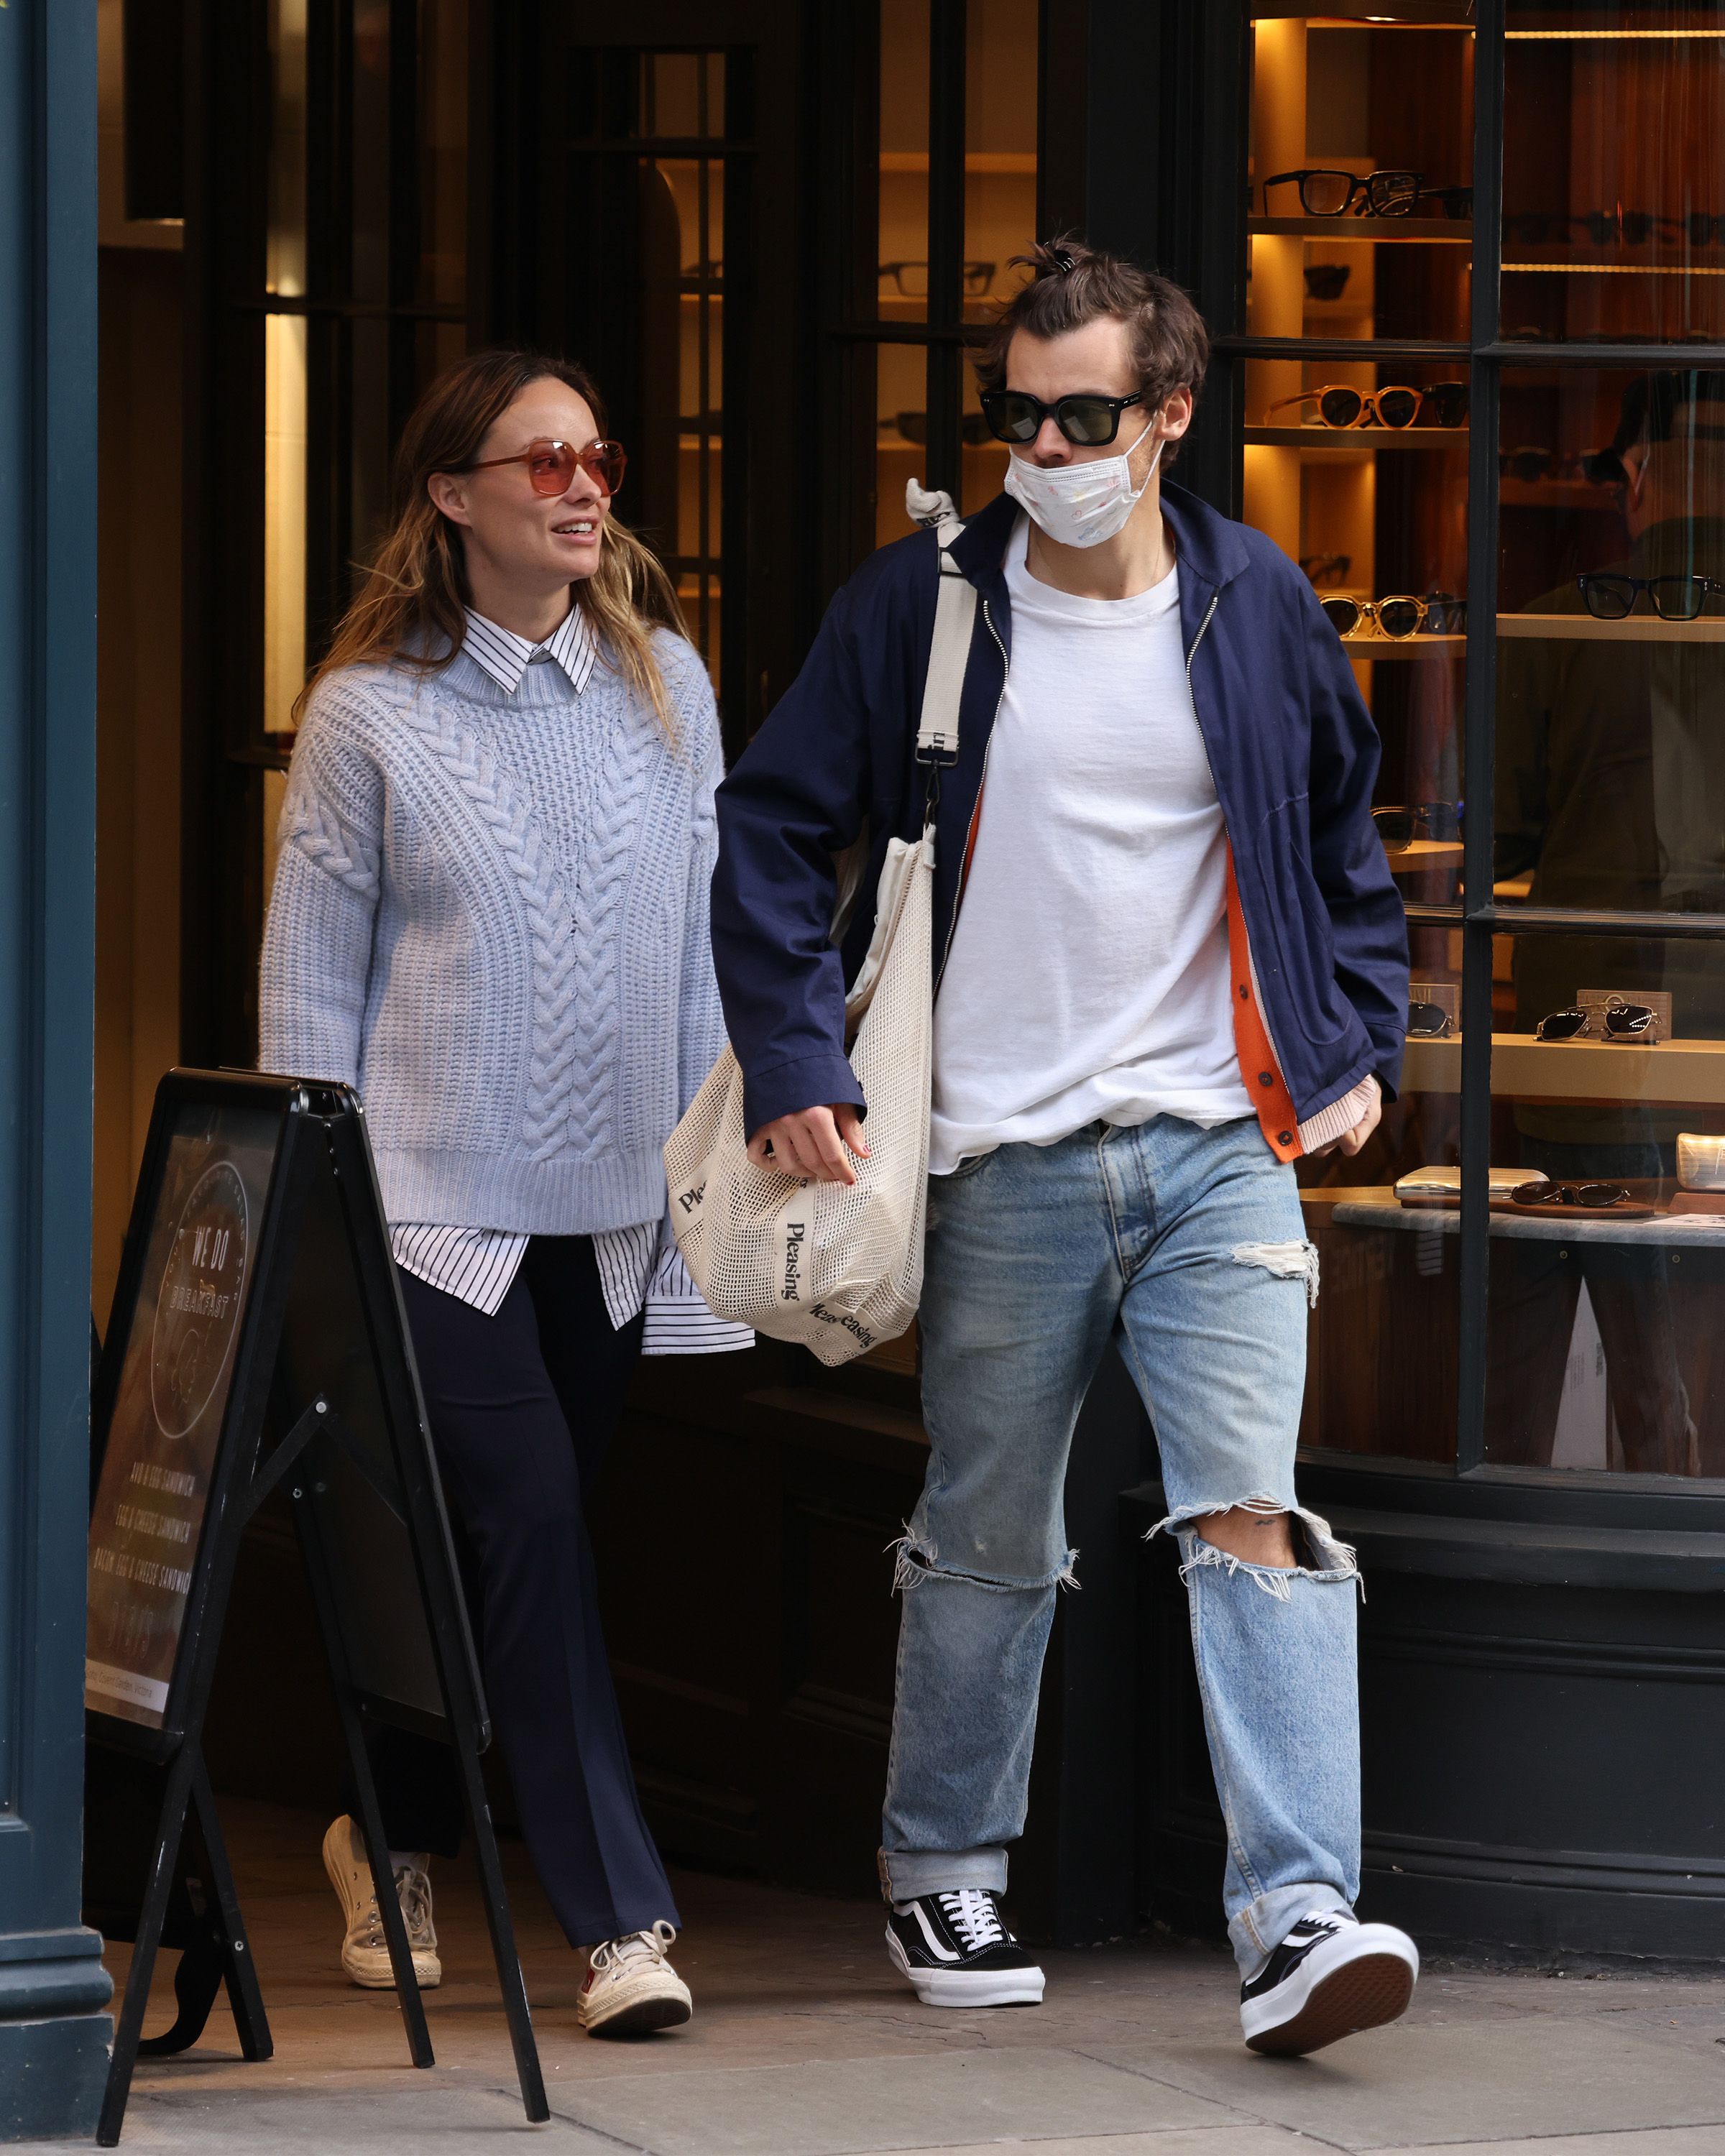 Harry Styles And Olivia Wilde Have Broken Up After Two Years Of Relationship Celebrity Gossip News 